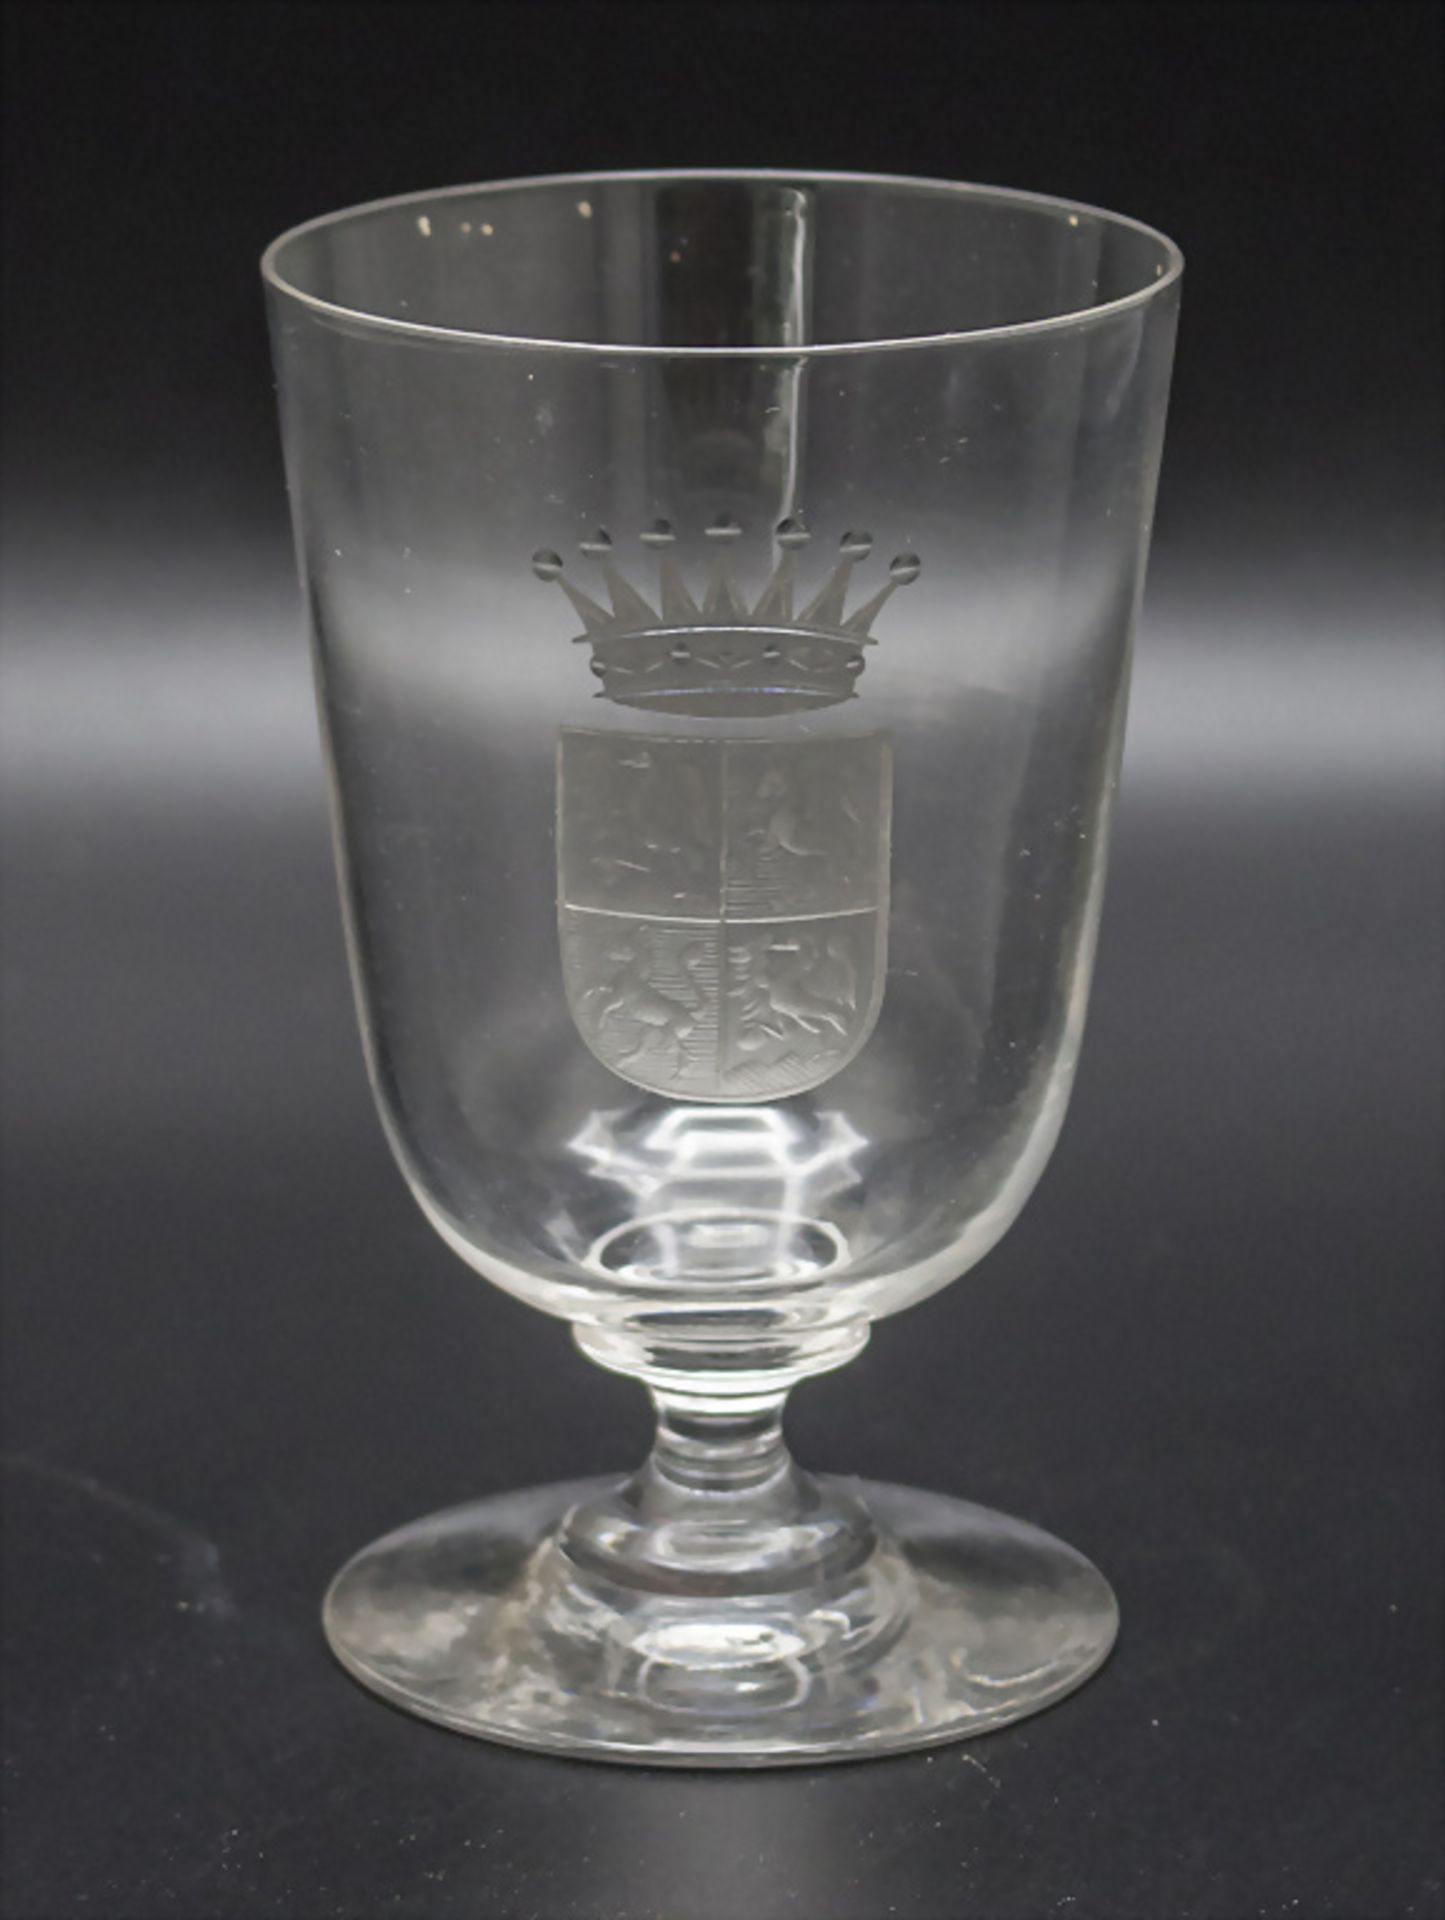 Fußbecher mit Wappen / A footed glass beaker with coat of arms, 19. Jh.